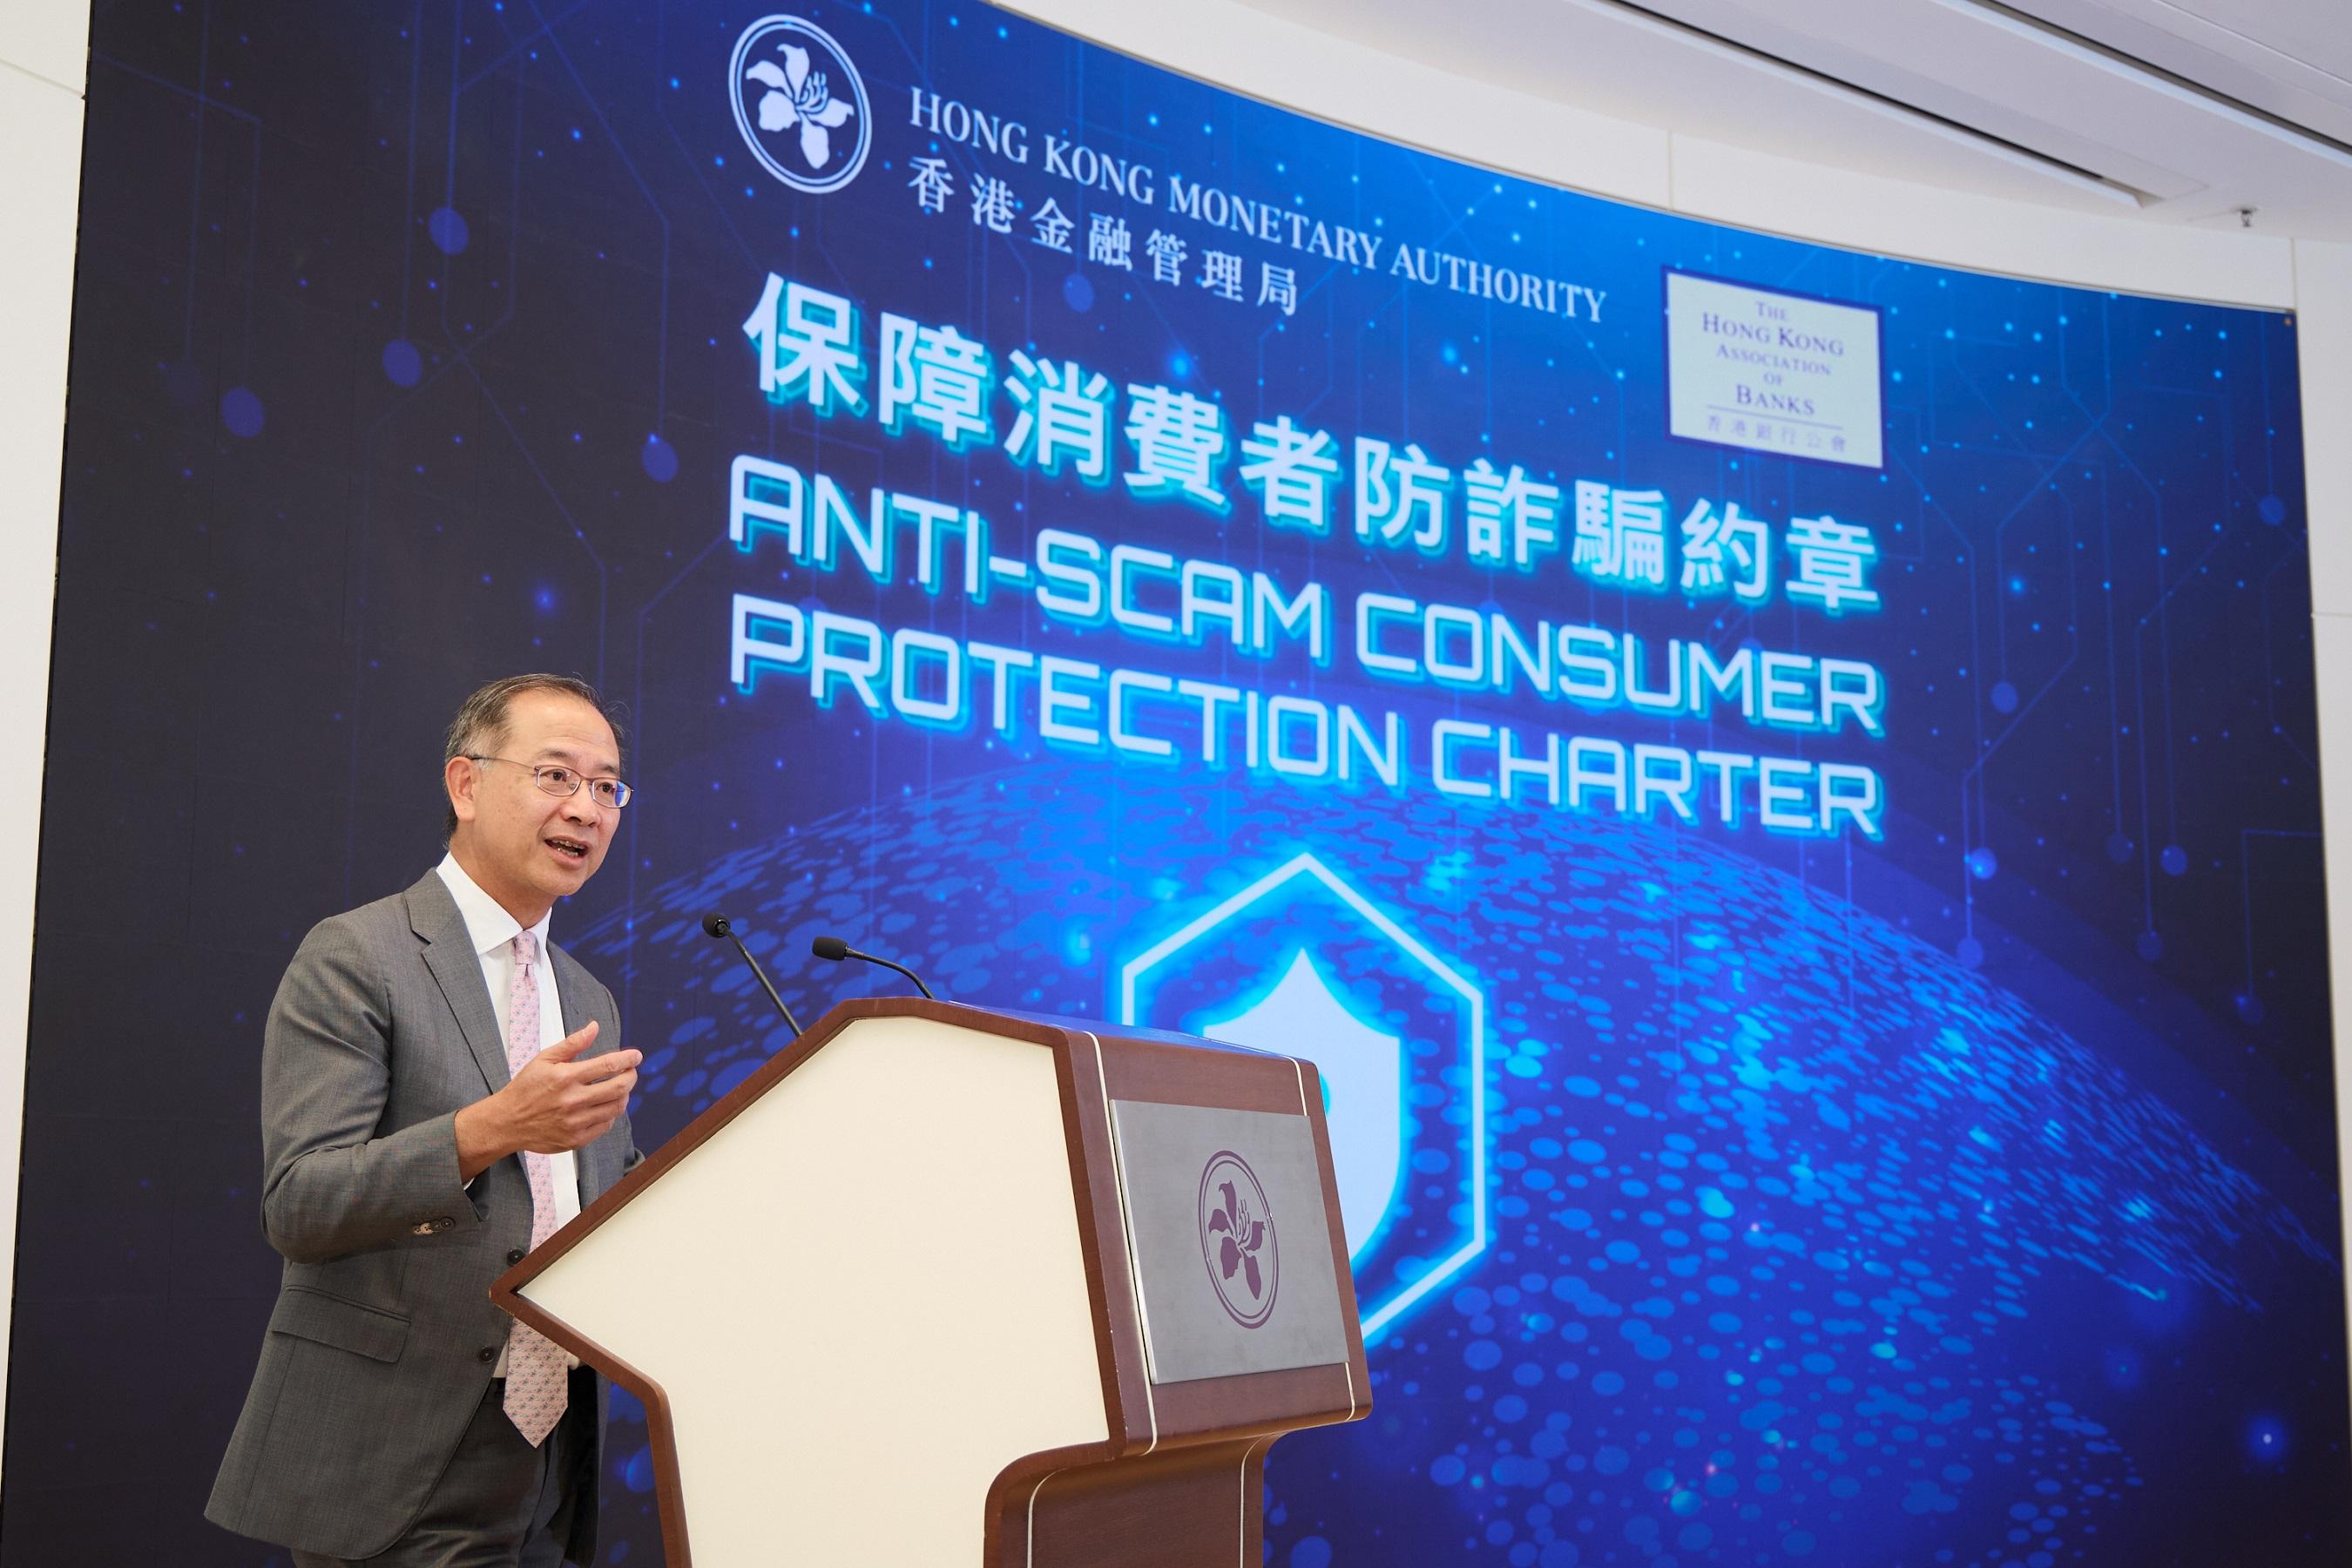 The Chief Executive of the Hong Kong Monetary Authority, Mr Eddie Yue, today (June 29) gives opening remarks at the Anti-Scam Consumer Protection Charter event, introducing the key principles in the Charter.